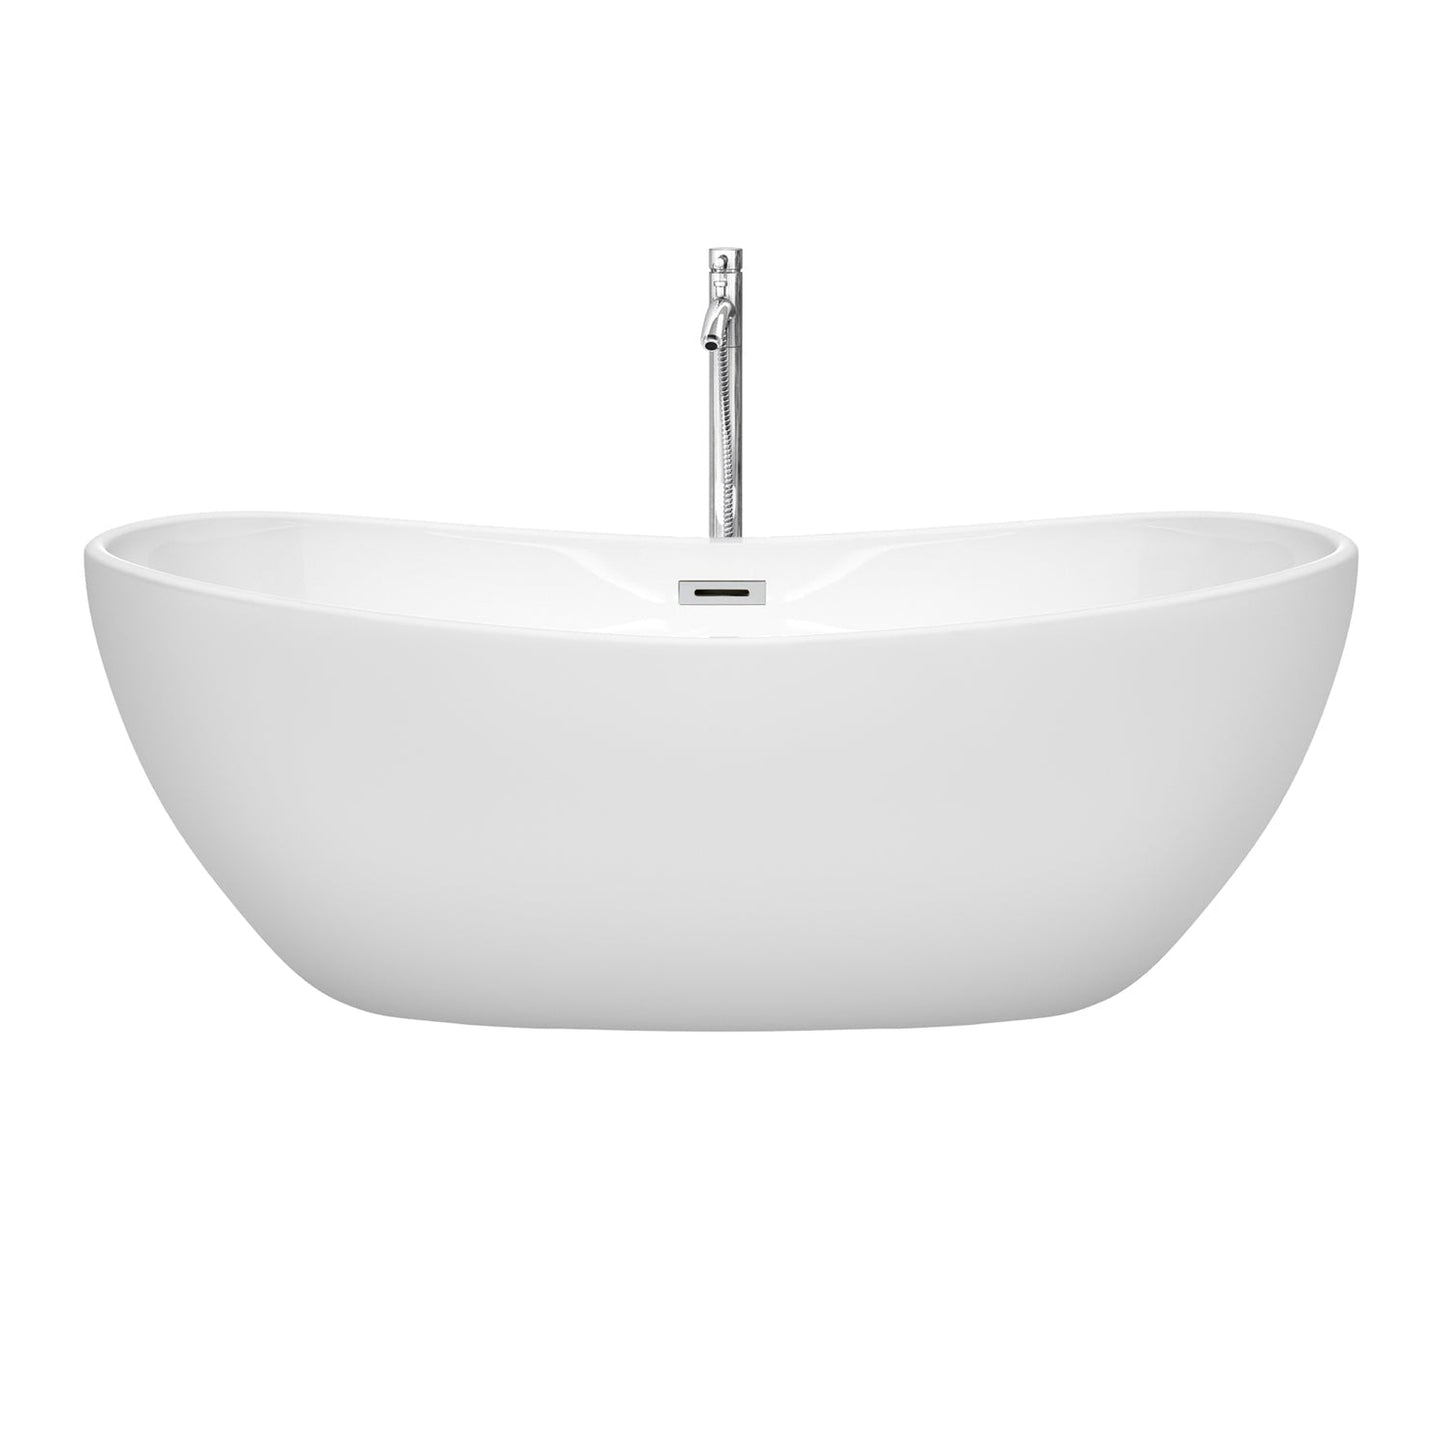 Wyndham Collection Rebecca 65" Freestanding Bathtub in White With Floor Mounted Faucet, Drain and Overflow Trim in Polished Chrome